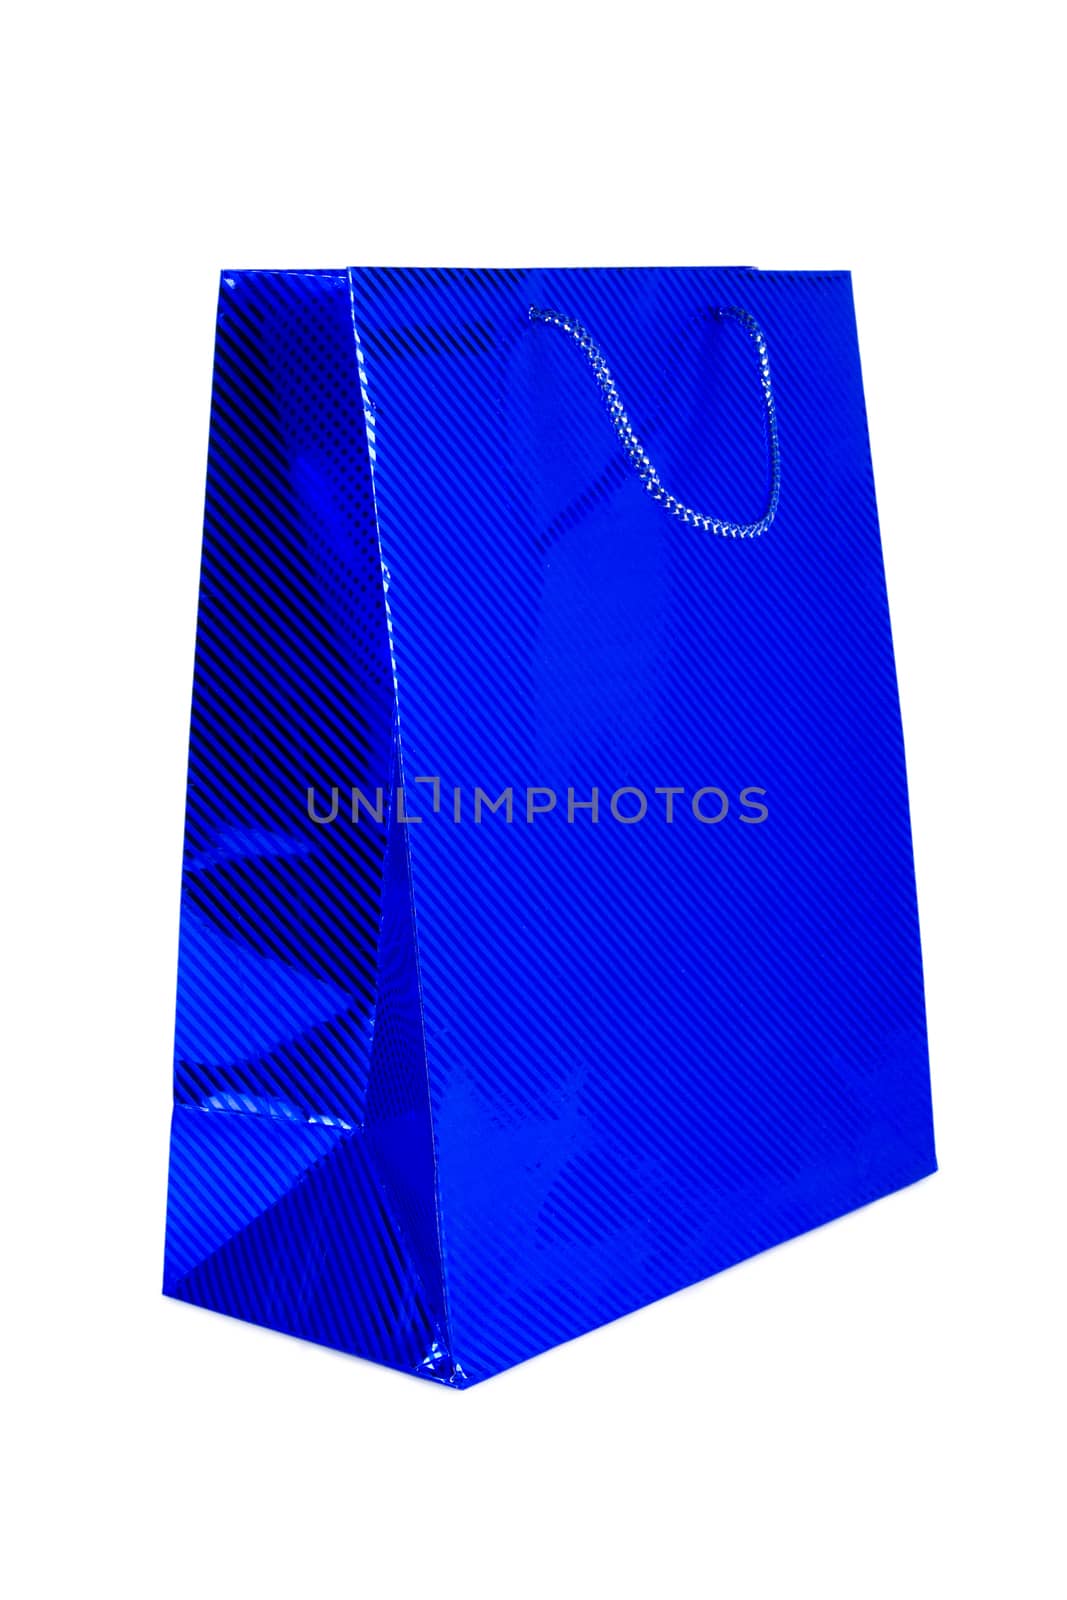 Paper shopping bag isolated on white - Stock Image